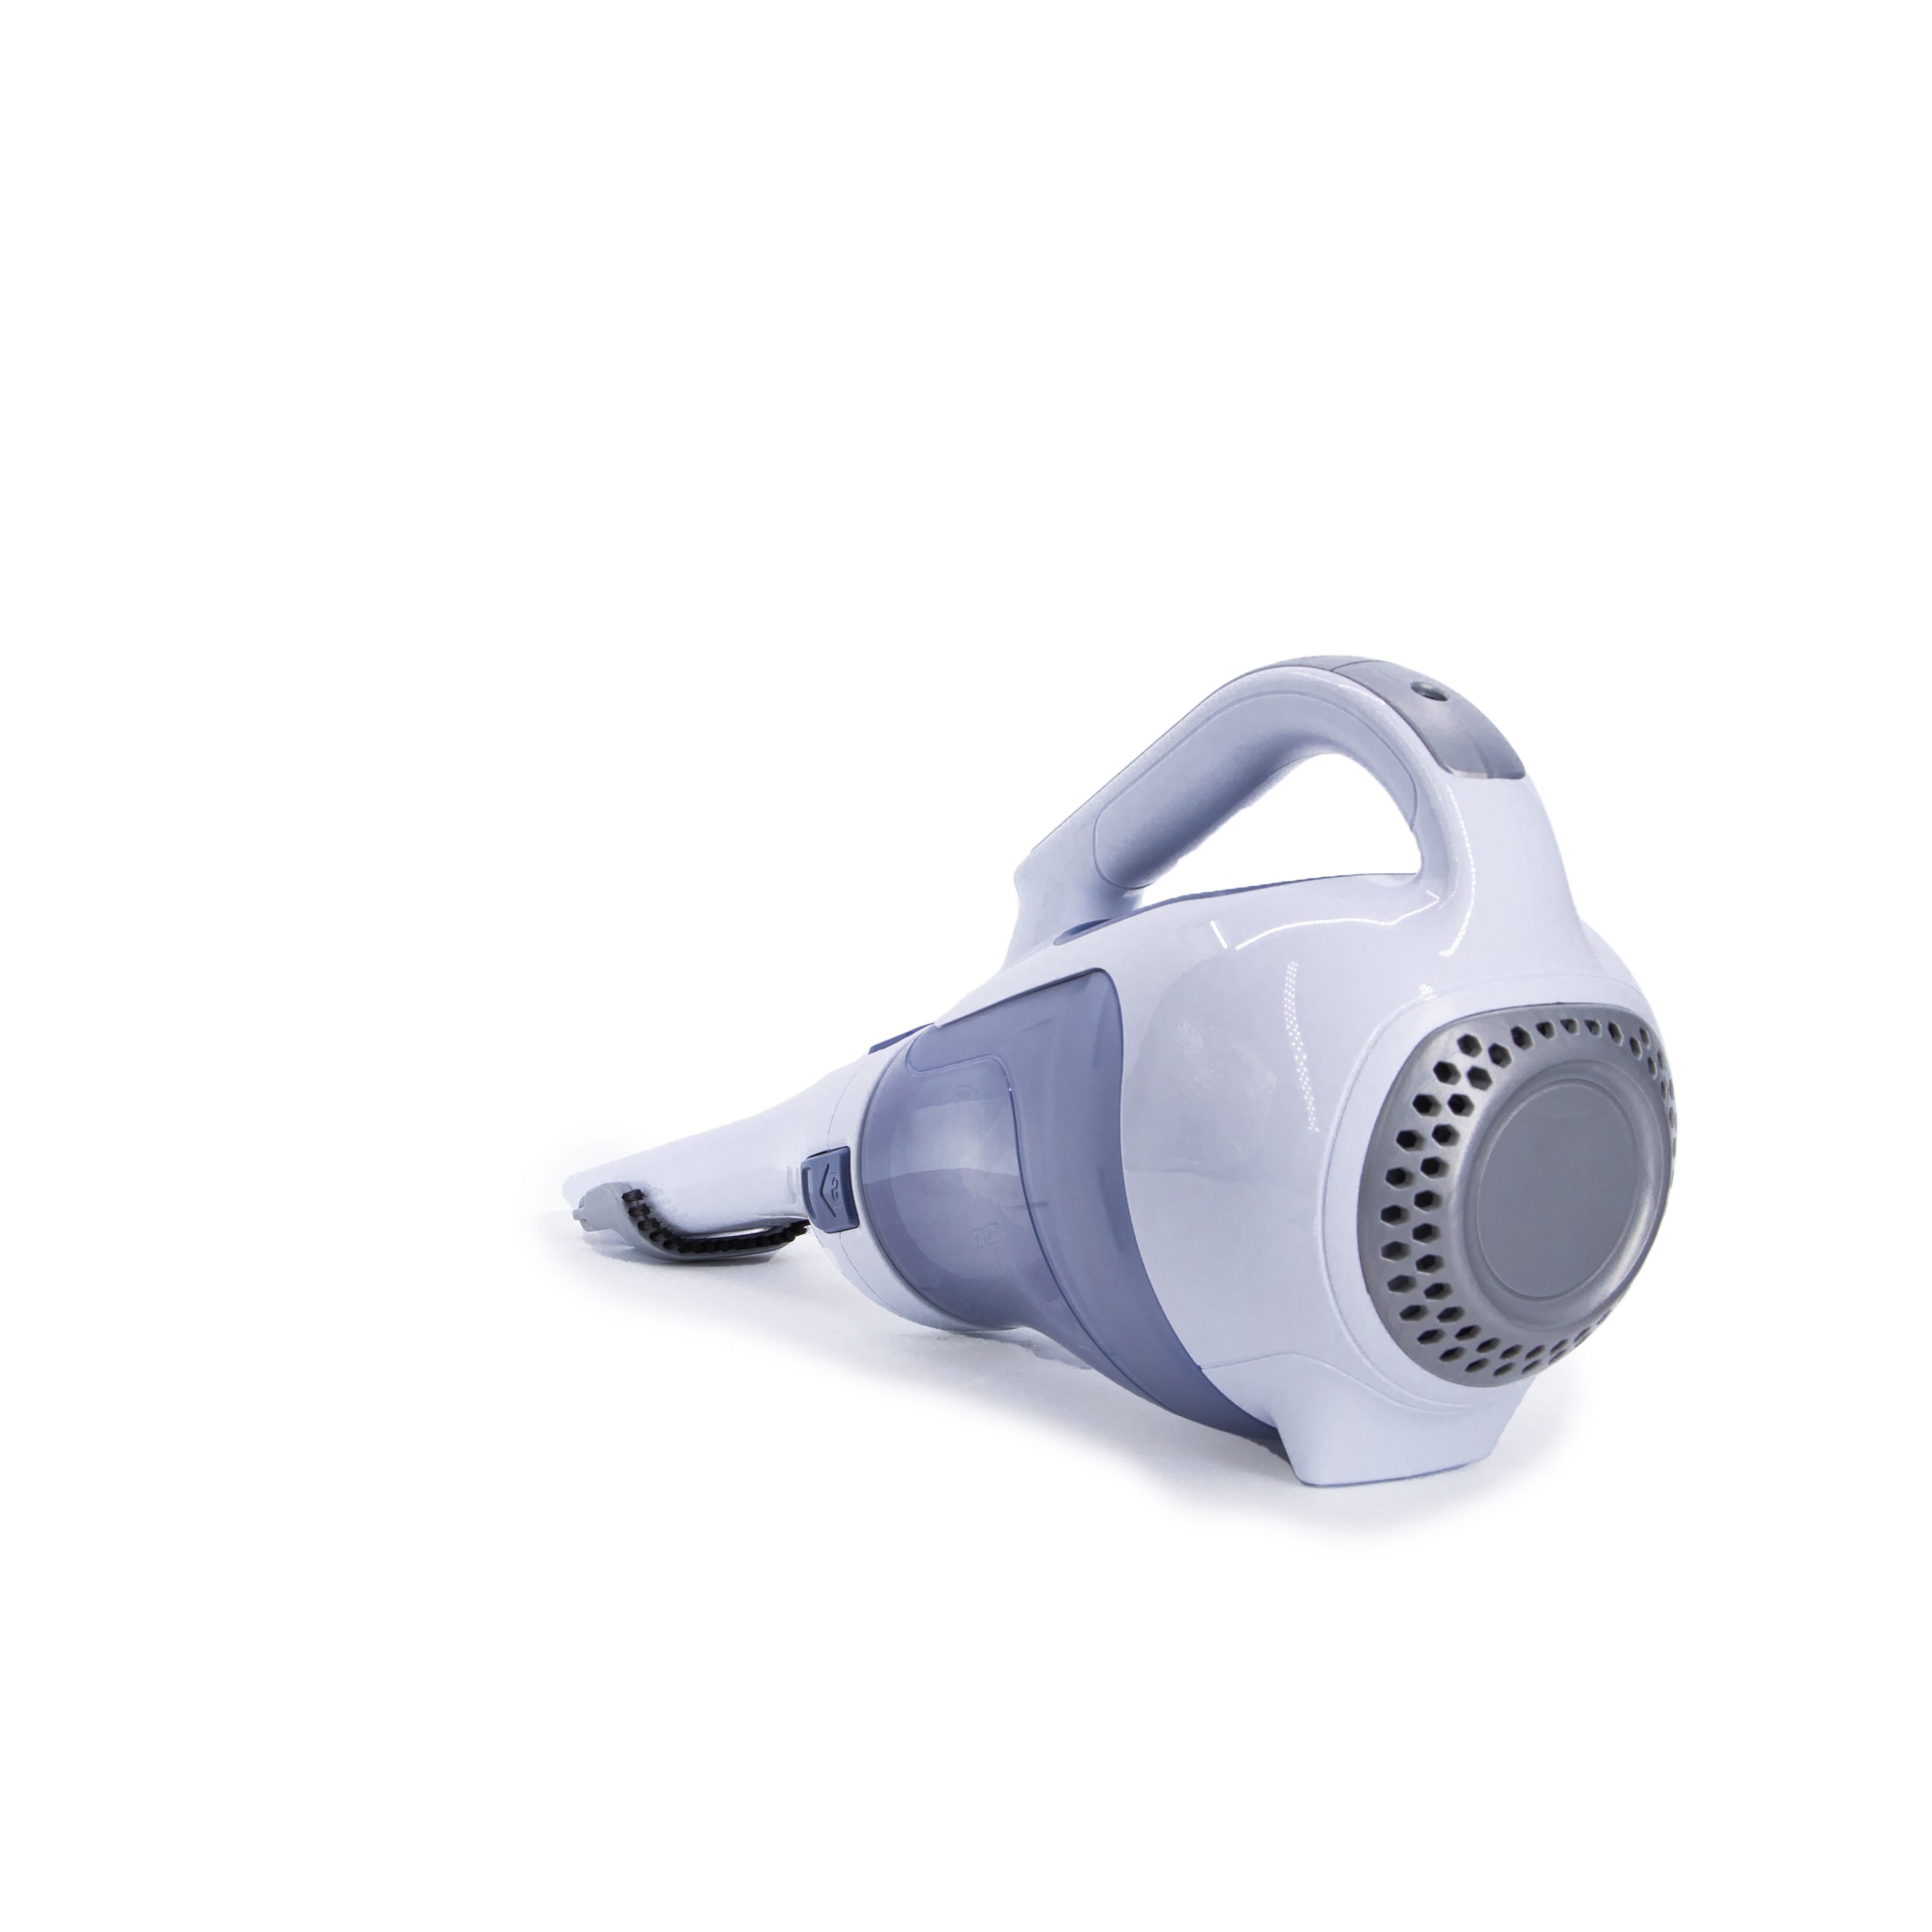 Black decker dustbuster • Compare & see prices now »